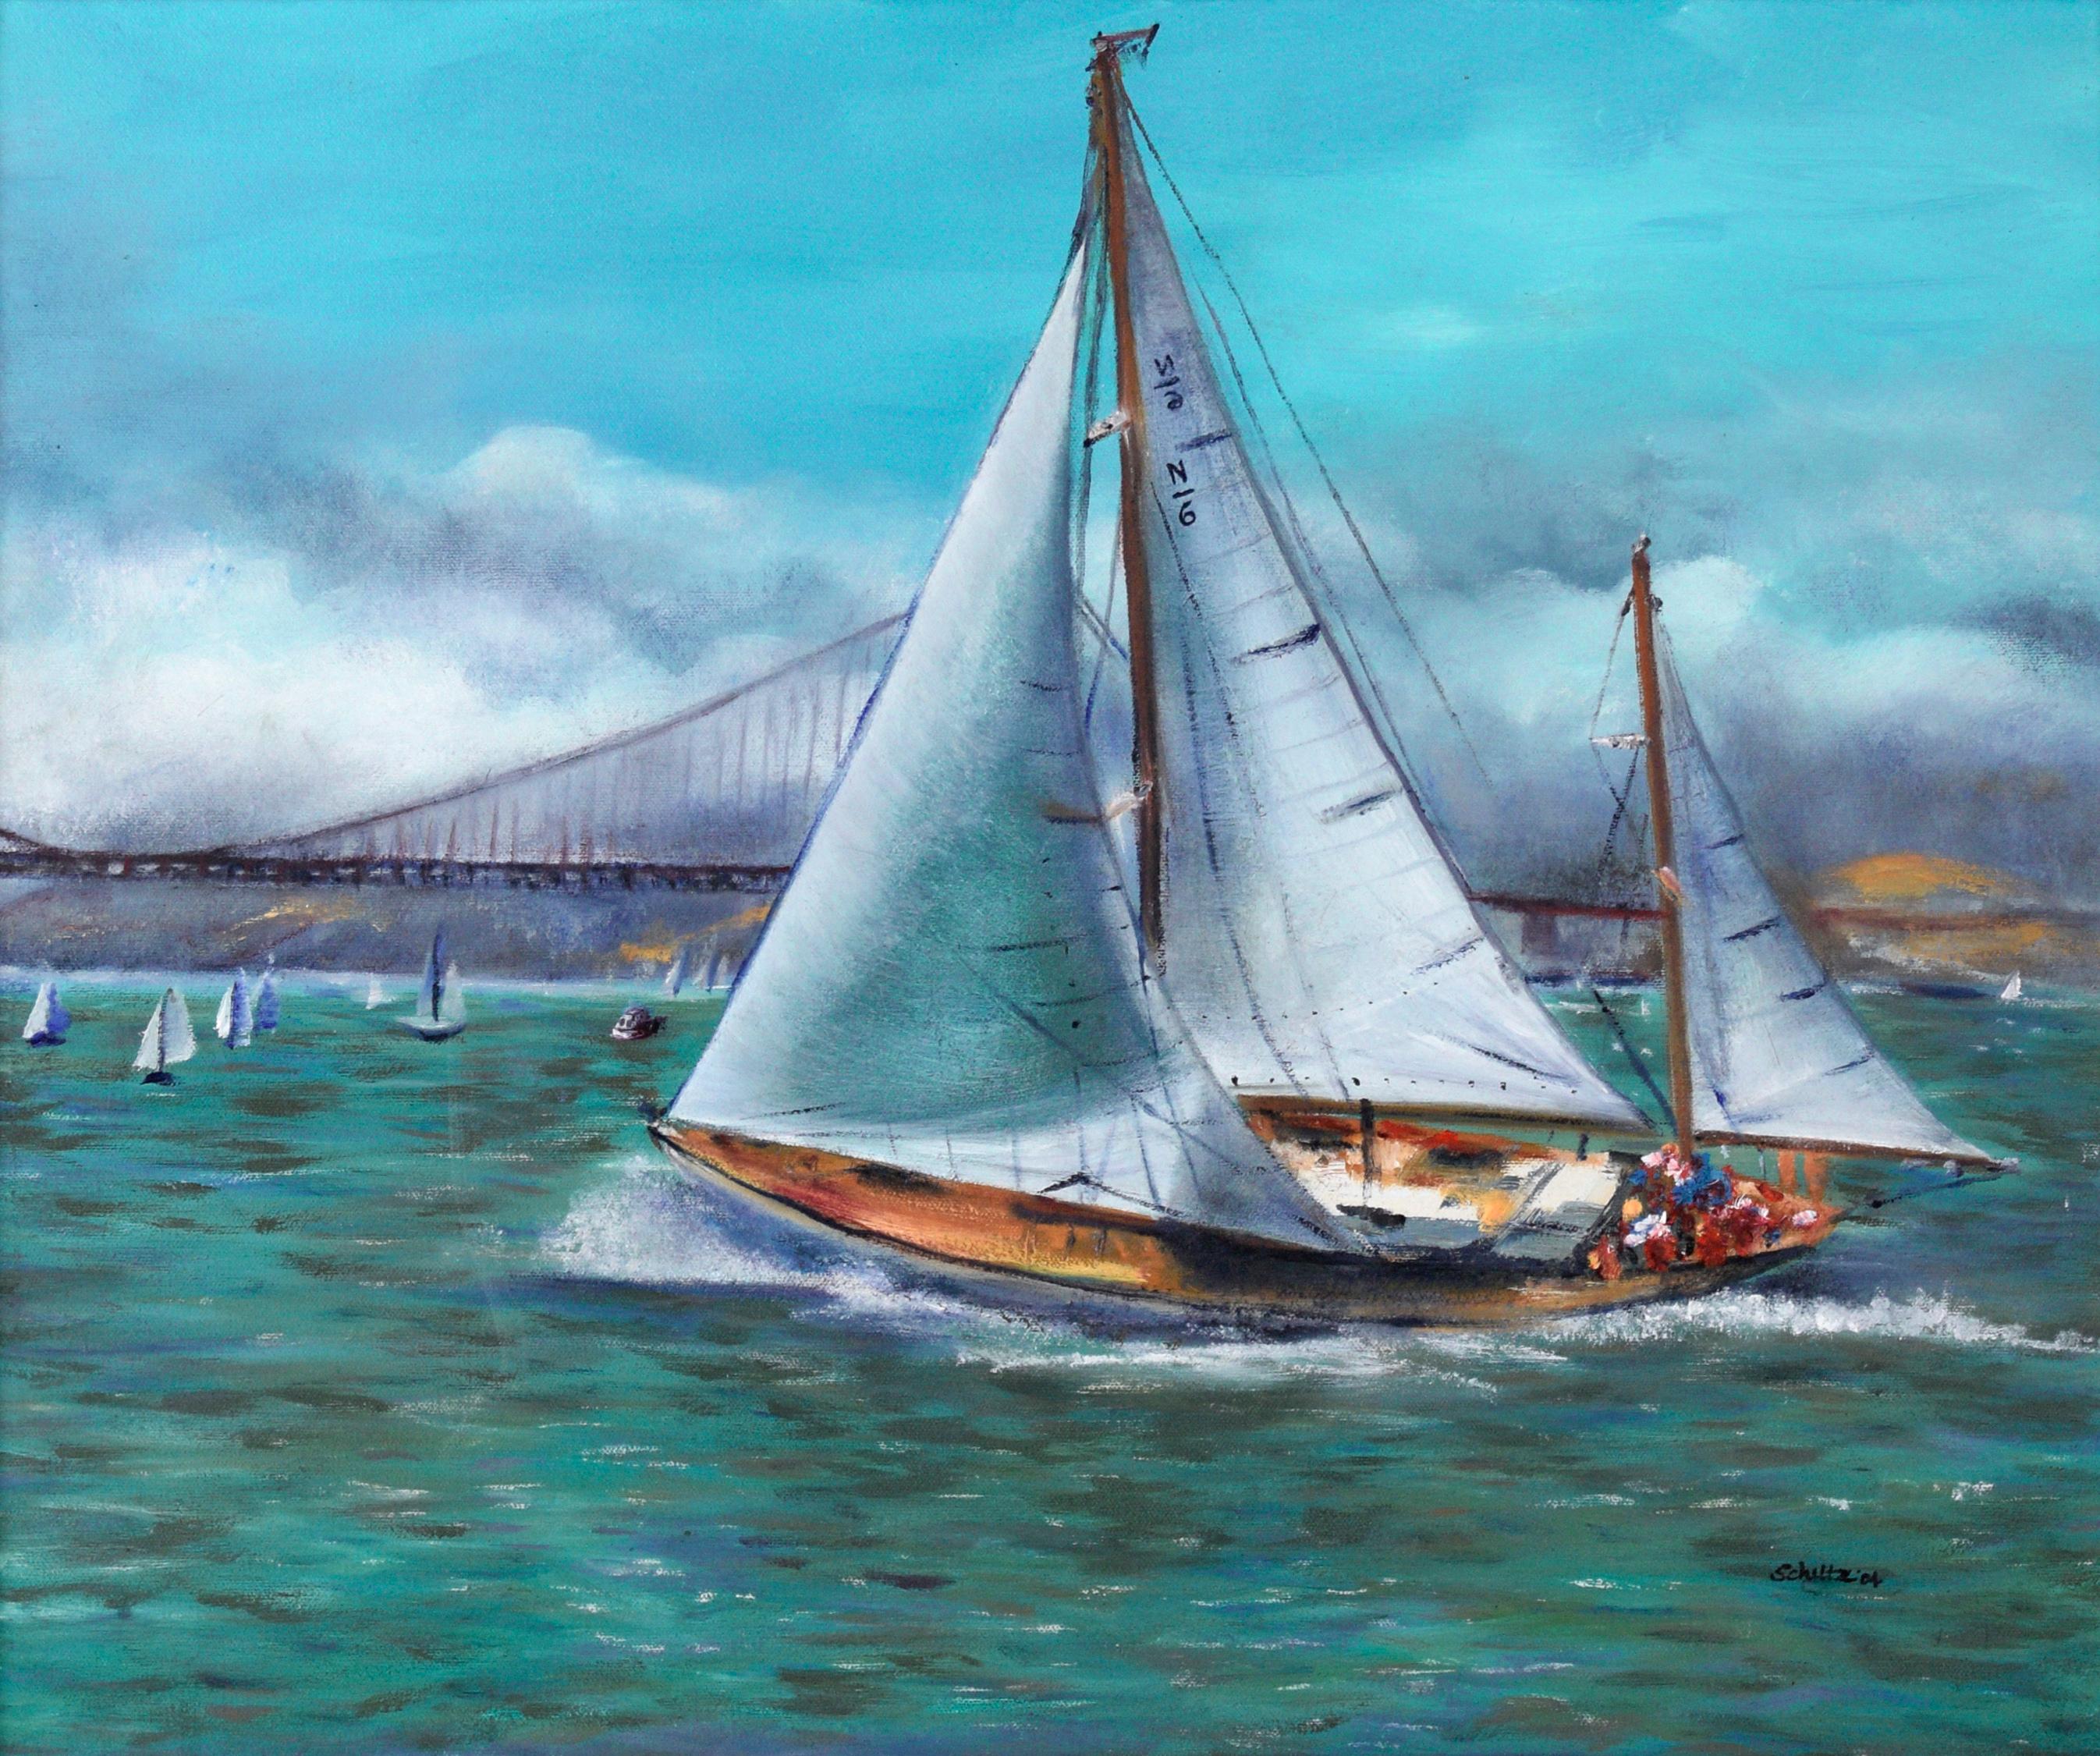 Sailing Regatta Under the Golden Gate Bridge - Seascape in Oil on Canvas - Painting by Unknown